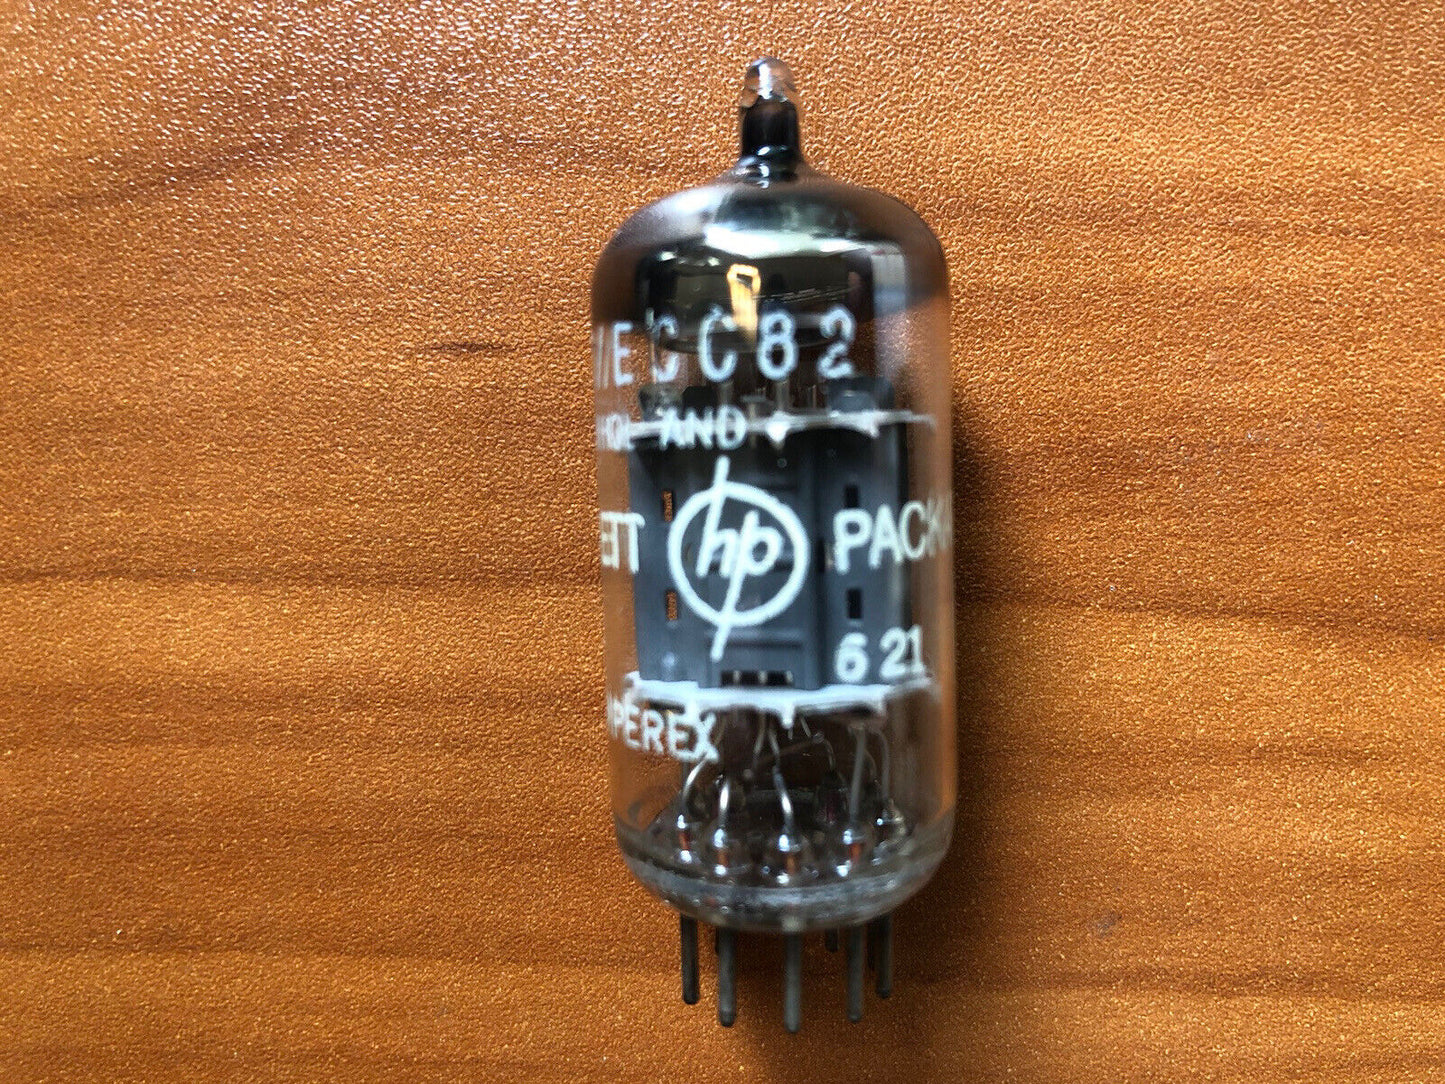 HP Select Amperex 12AU7 ECC82 Preamp Tube - Holland 1966 - Tests Strong